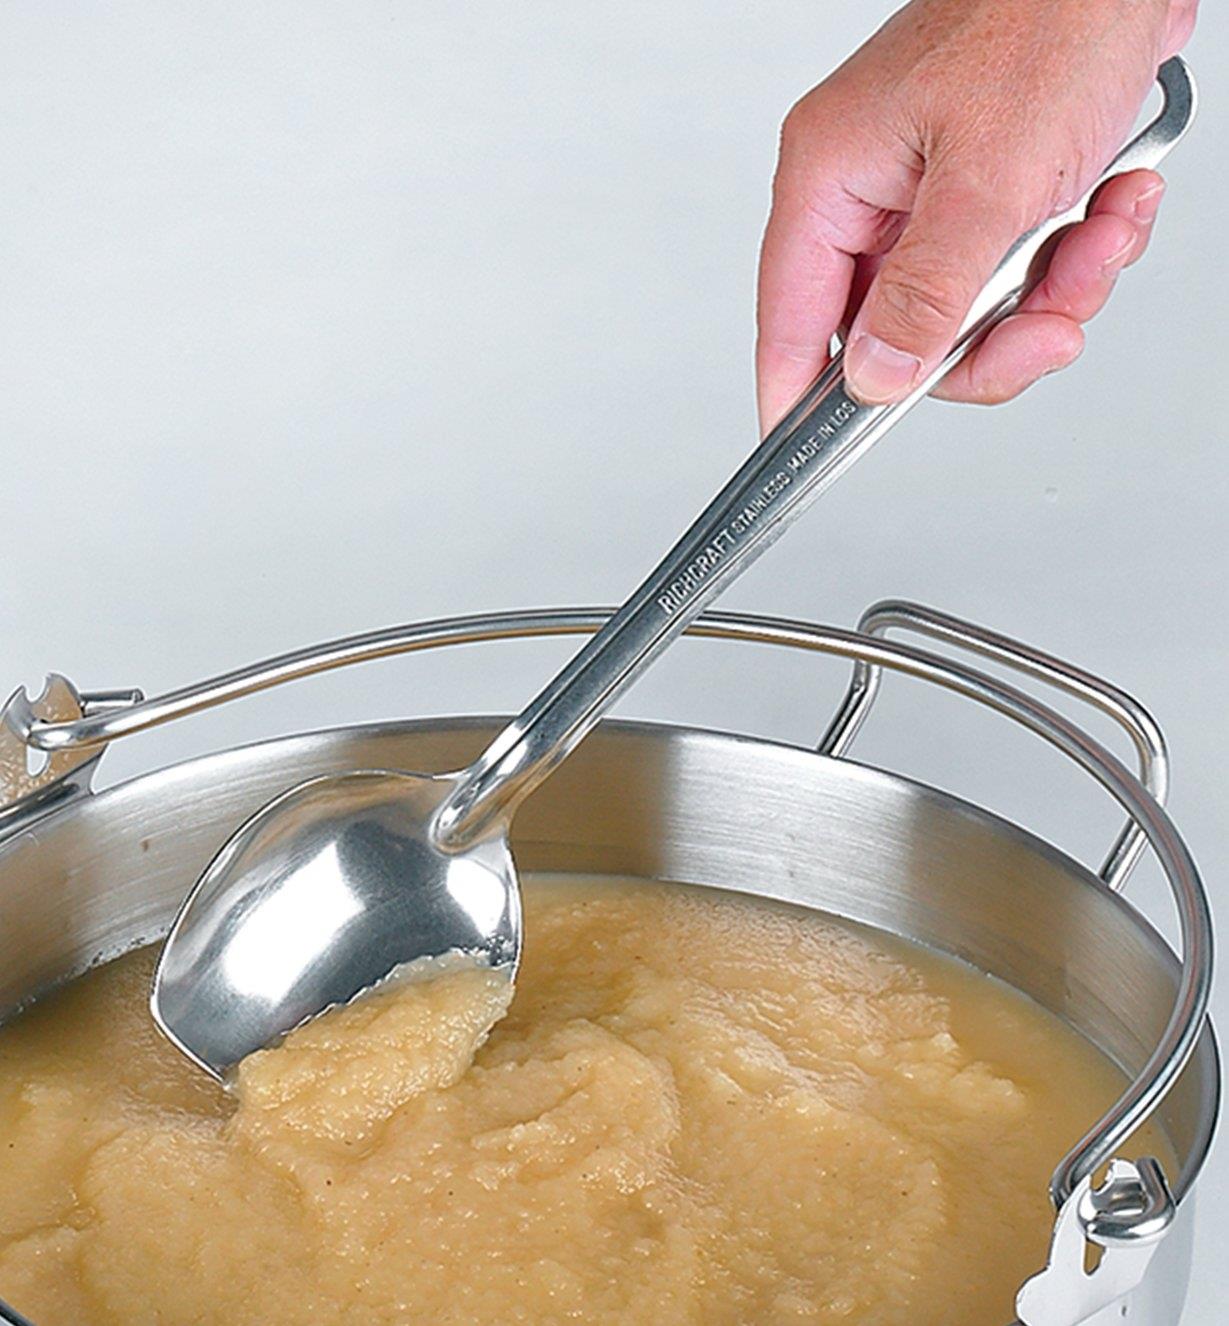 Using the solid slanted spoon to stir apple sauce in a pot